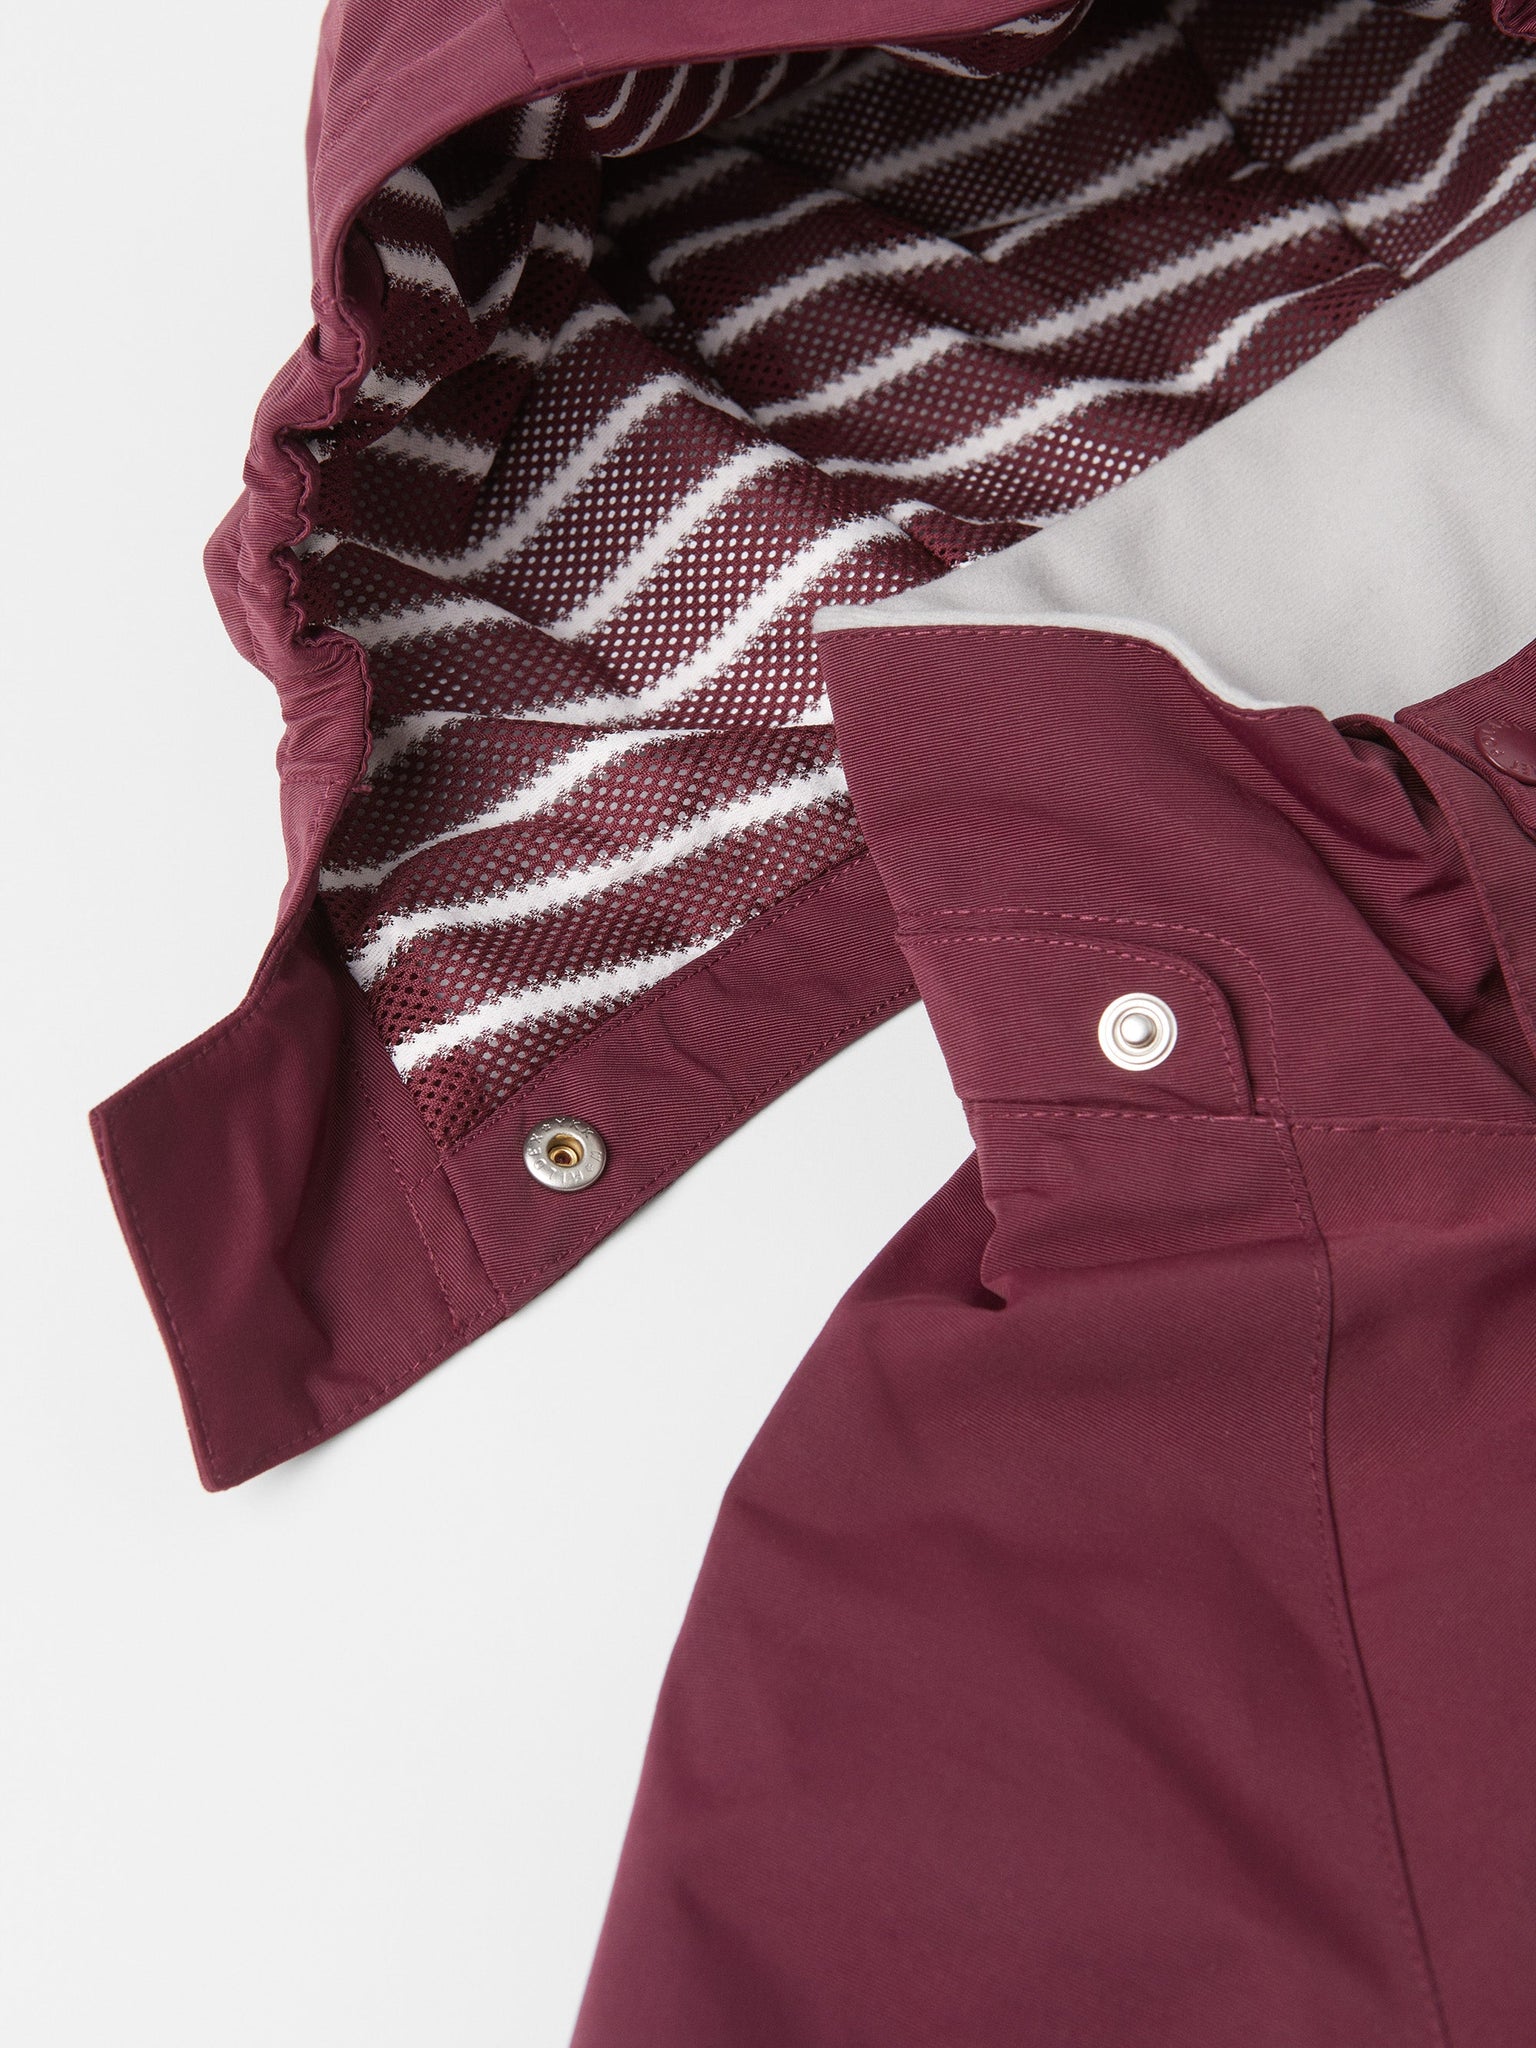 Kids Burgundy Waterproof Shell Jacket from the Polarn O. Pyret outerwear collection. Ethically produced kids outerwear.